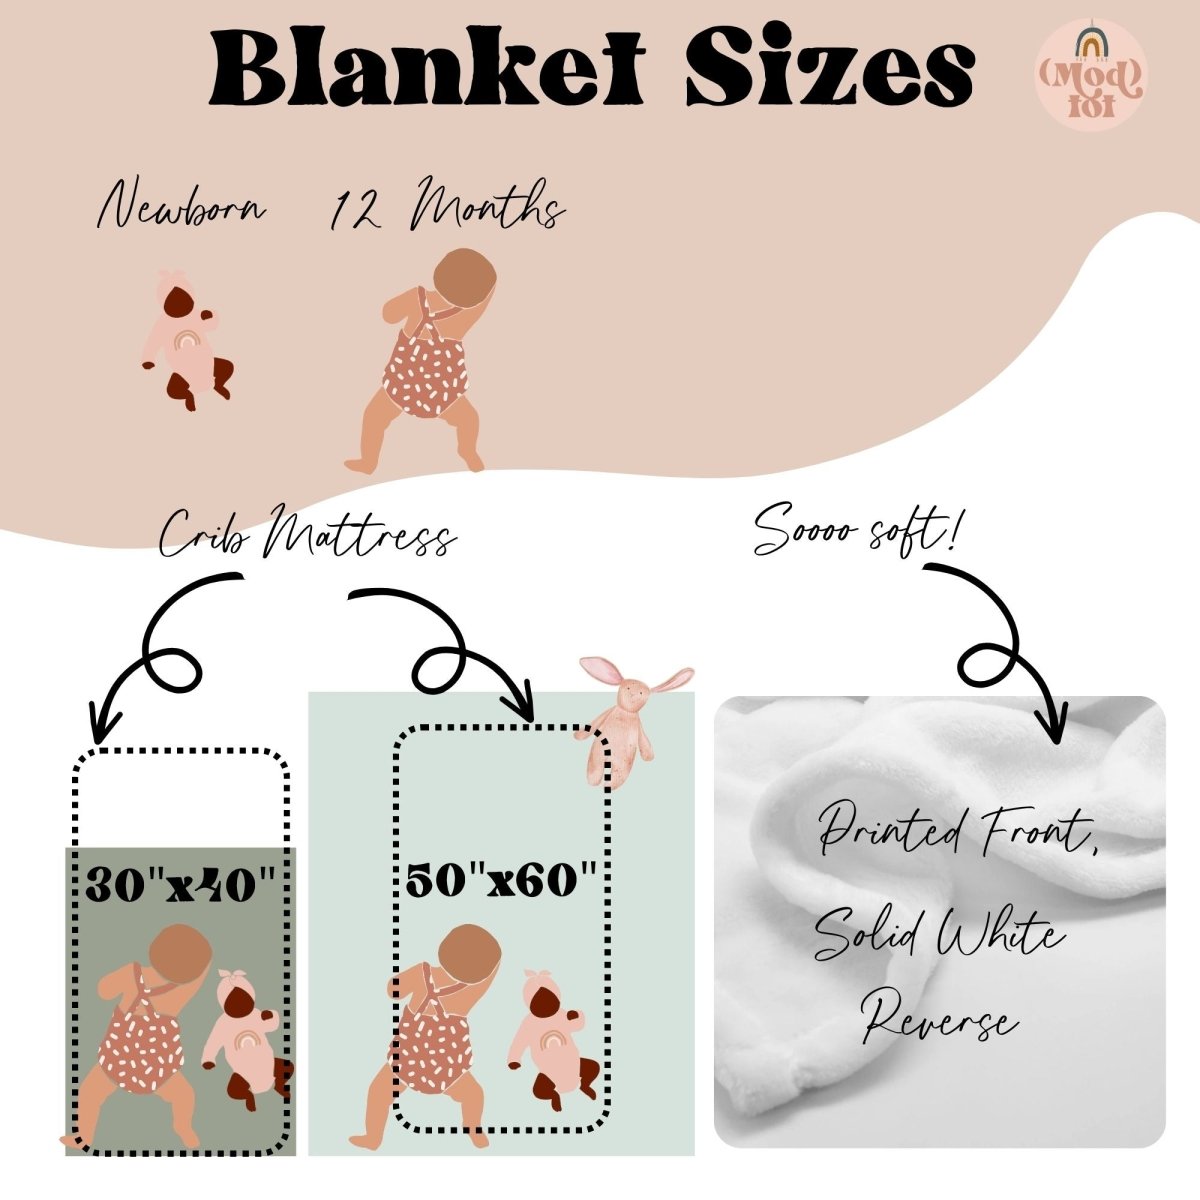 Coral Waves Personalized Minky Blanket - Coral Waves, gender_girl, Personalized_Yes